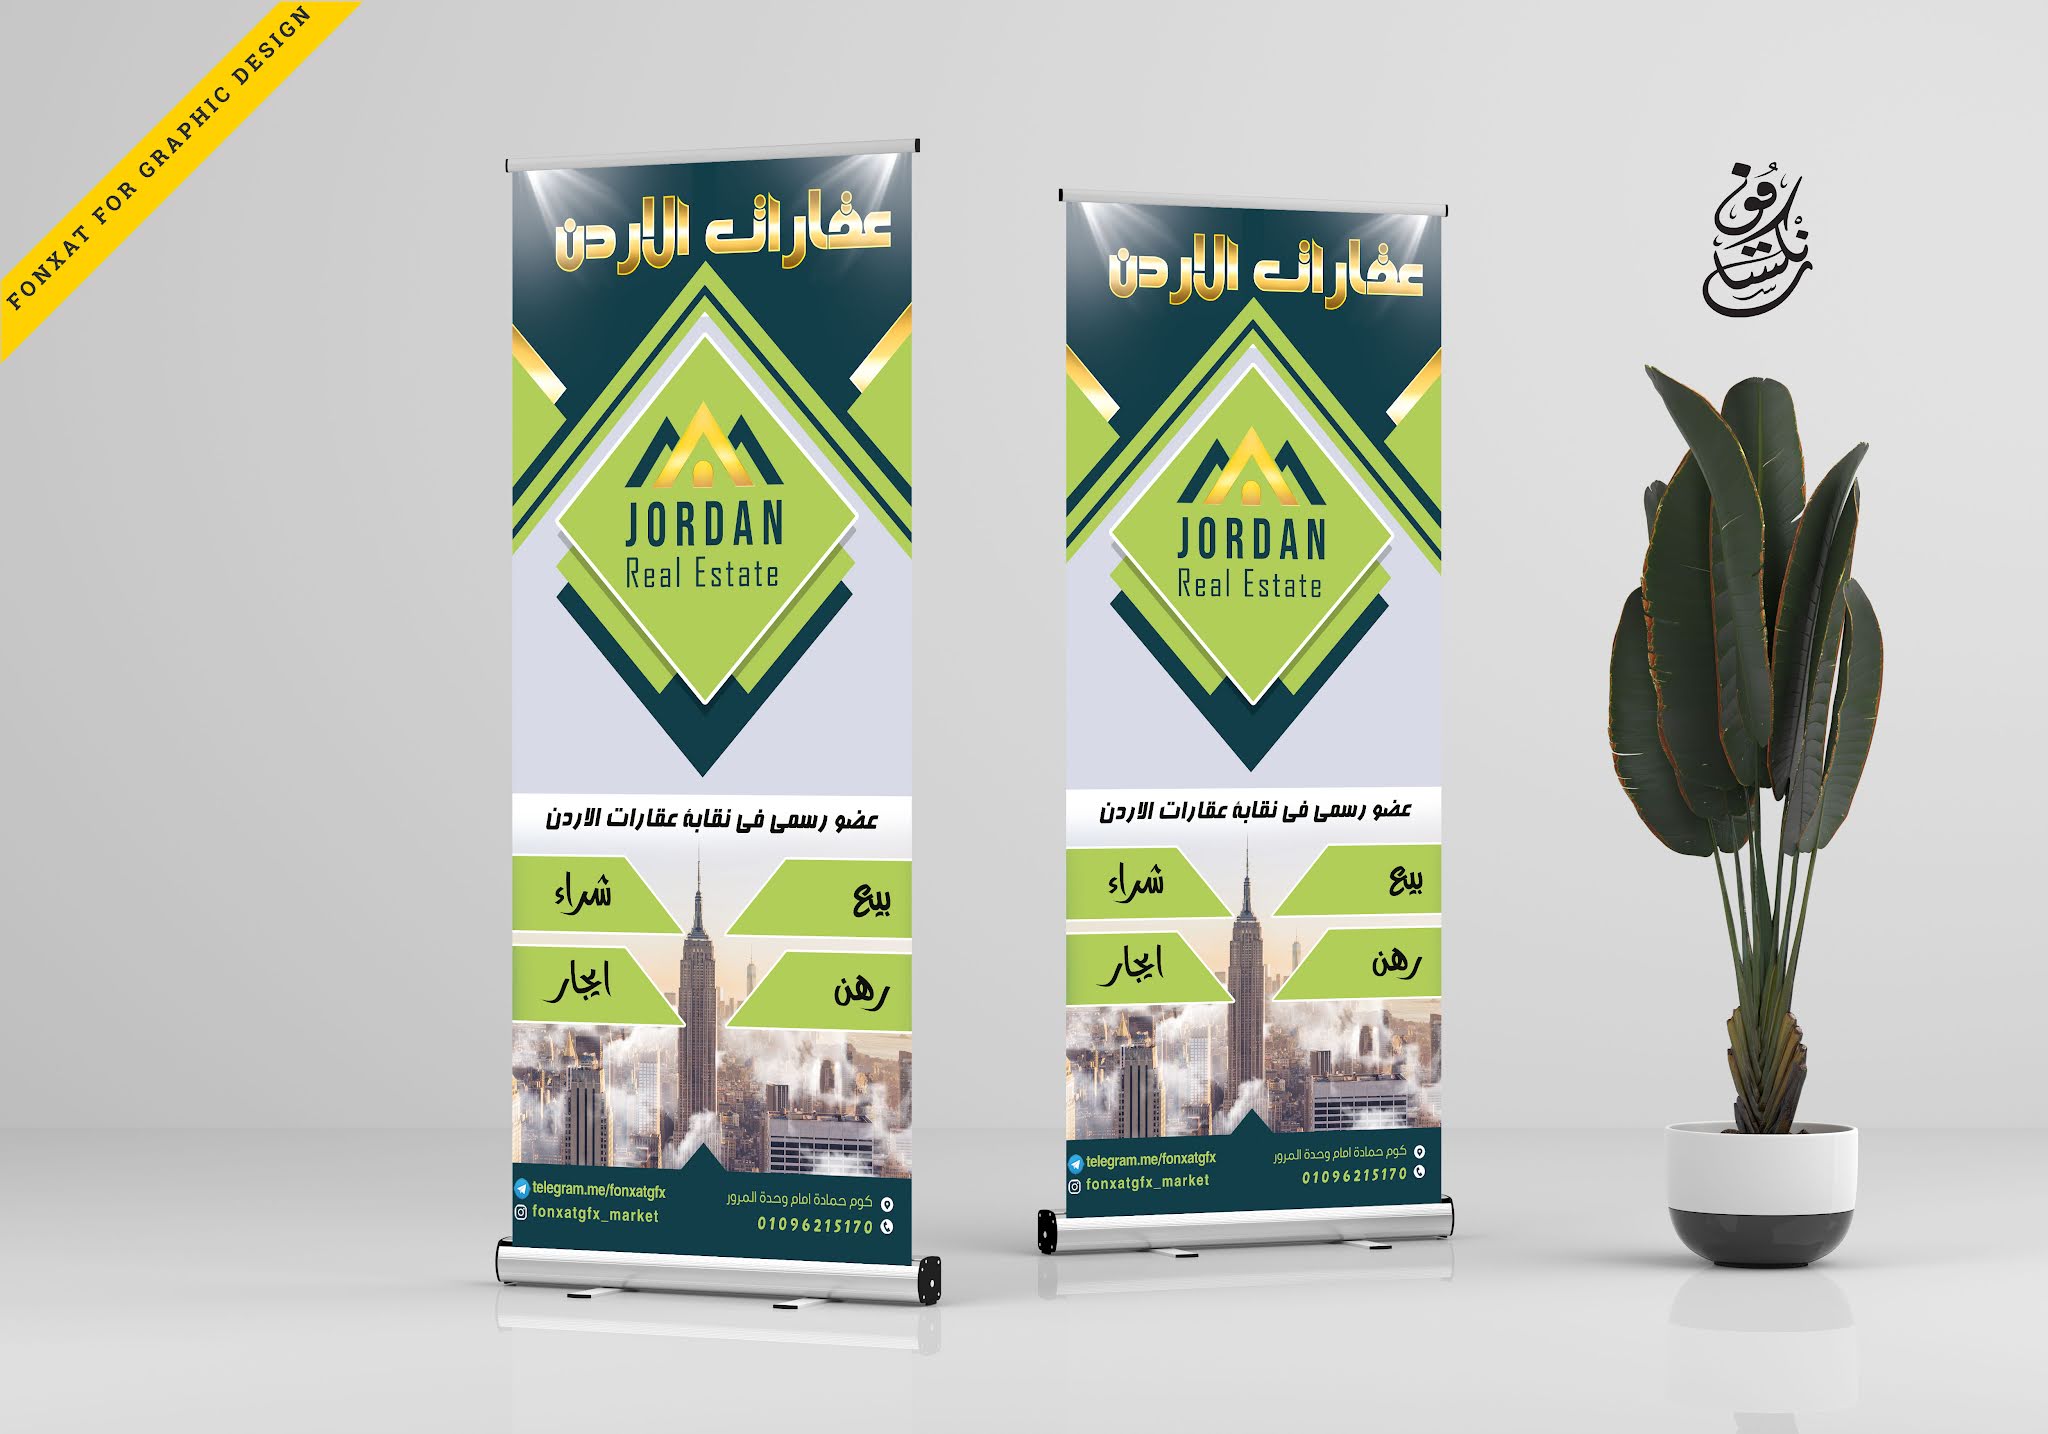 Roll up banner psd design ready for printing real estate field No. 4